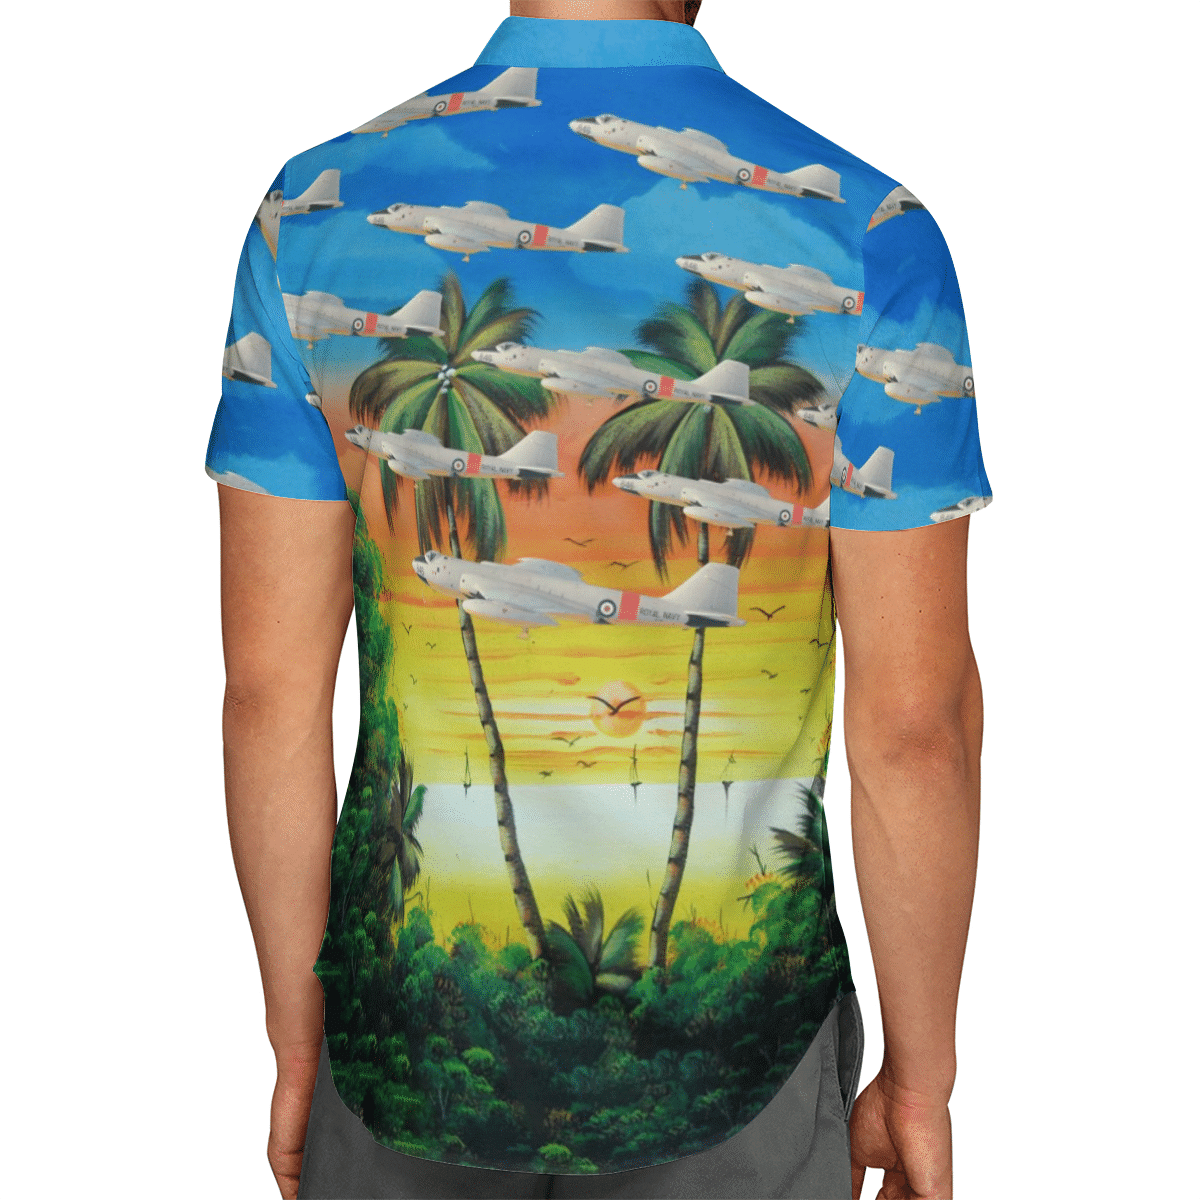 Going to the beach with a quality shirt 136